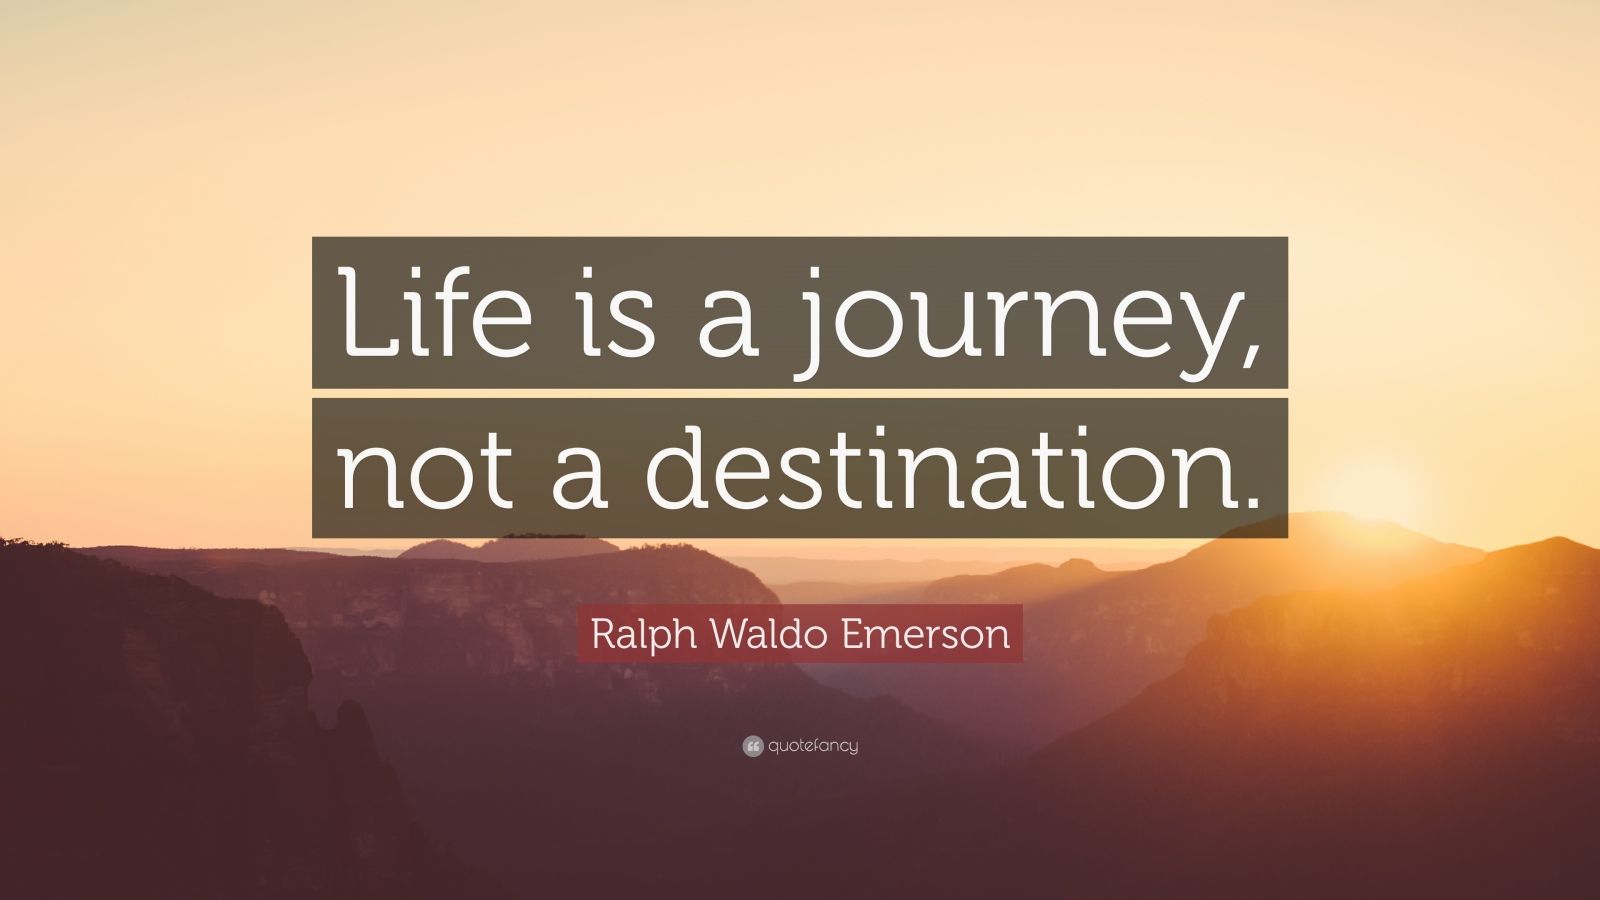 Ralph Waldo Emerson Quote: “Life is a journey, not a destination.” (27